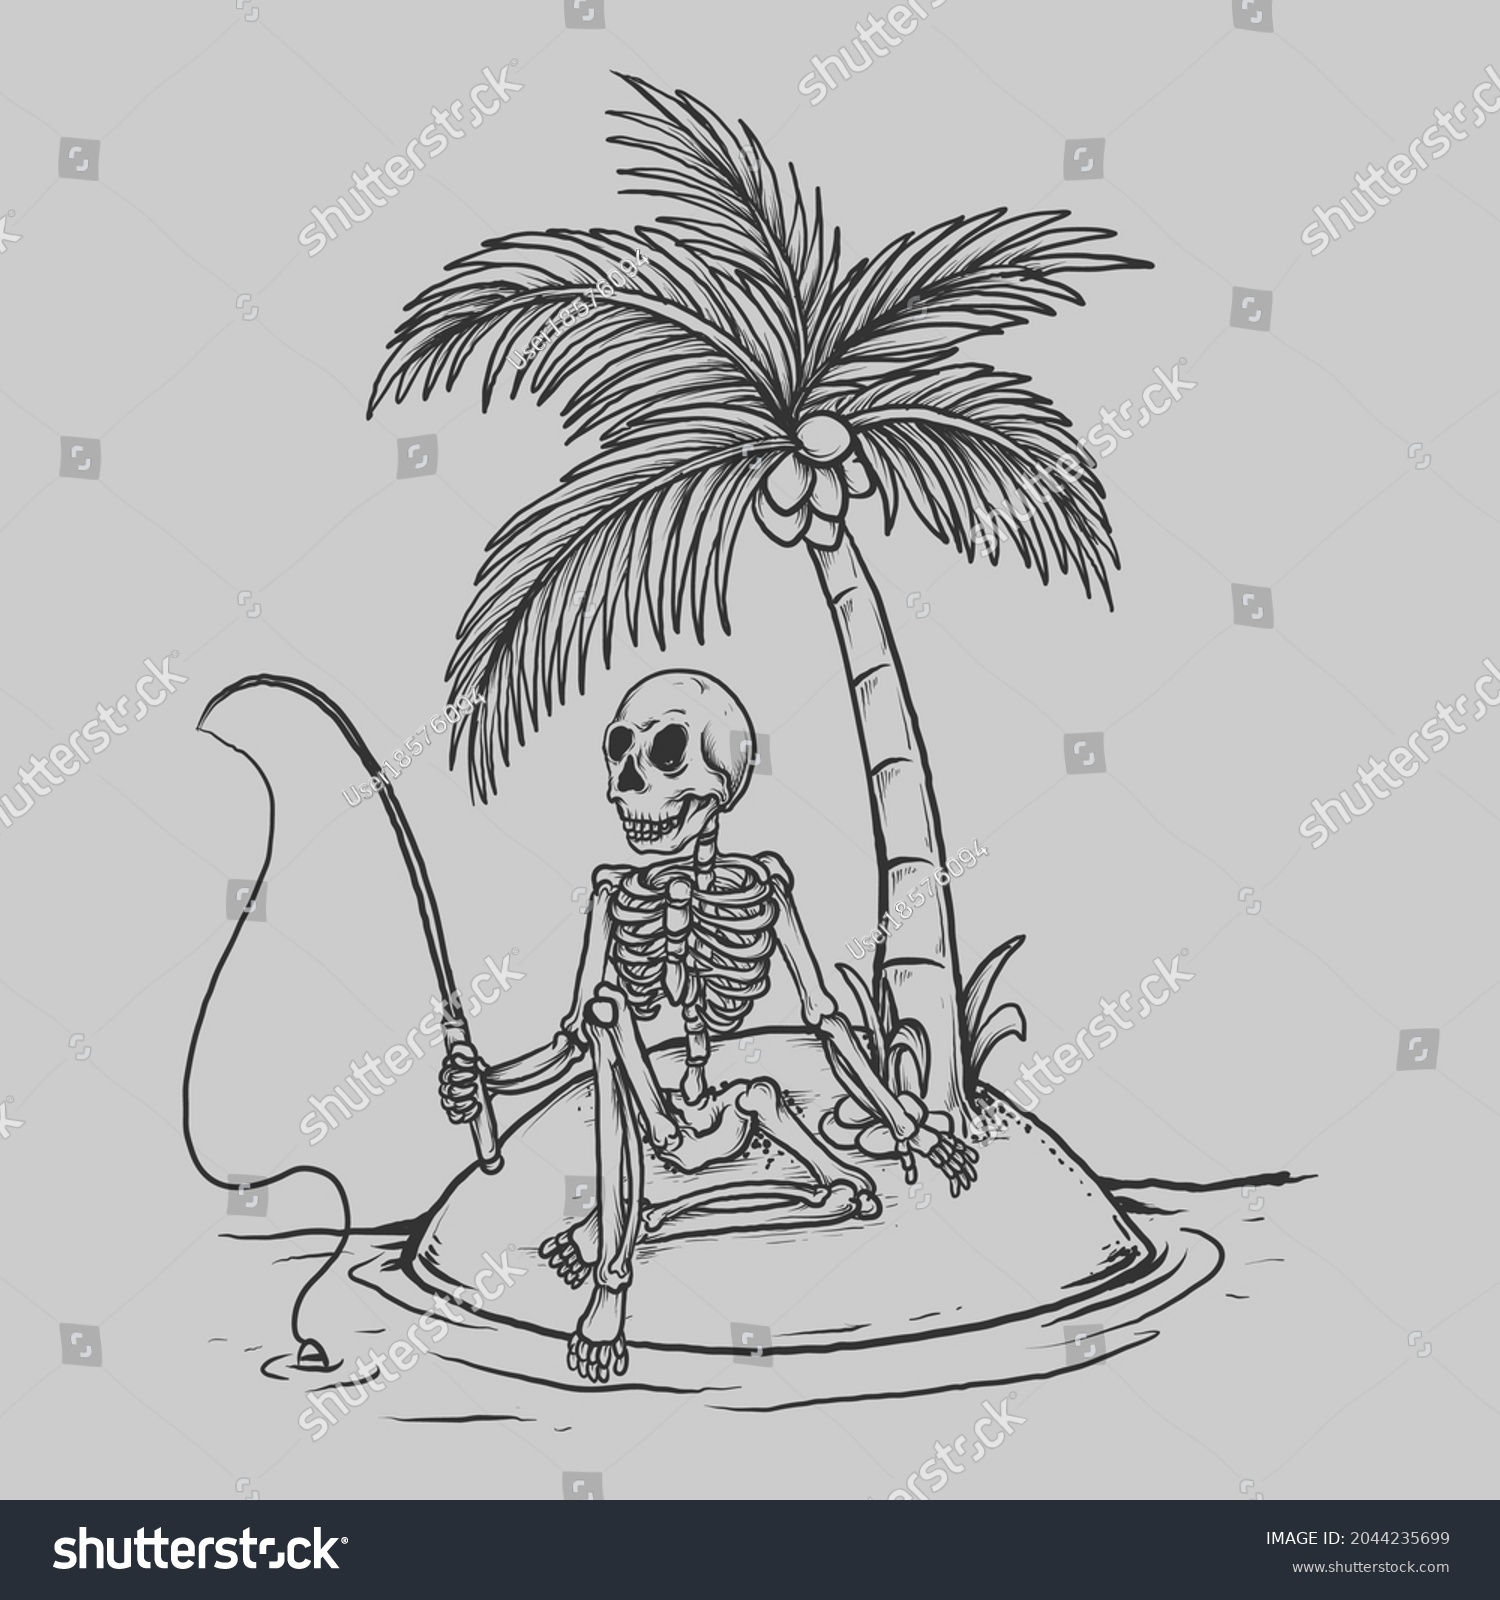 SVG of tattoo and t shirt design black and white hand drawn skeleton fishing engraving ornament svg